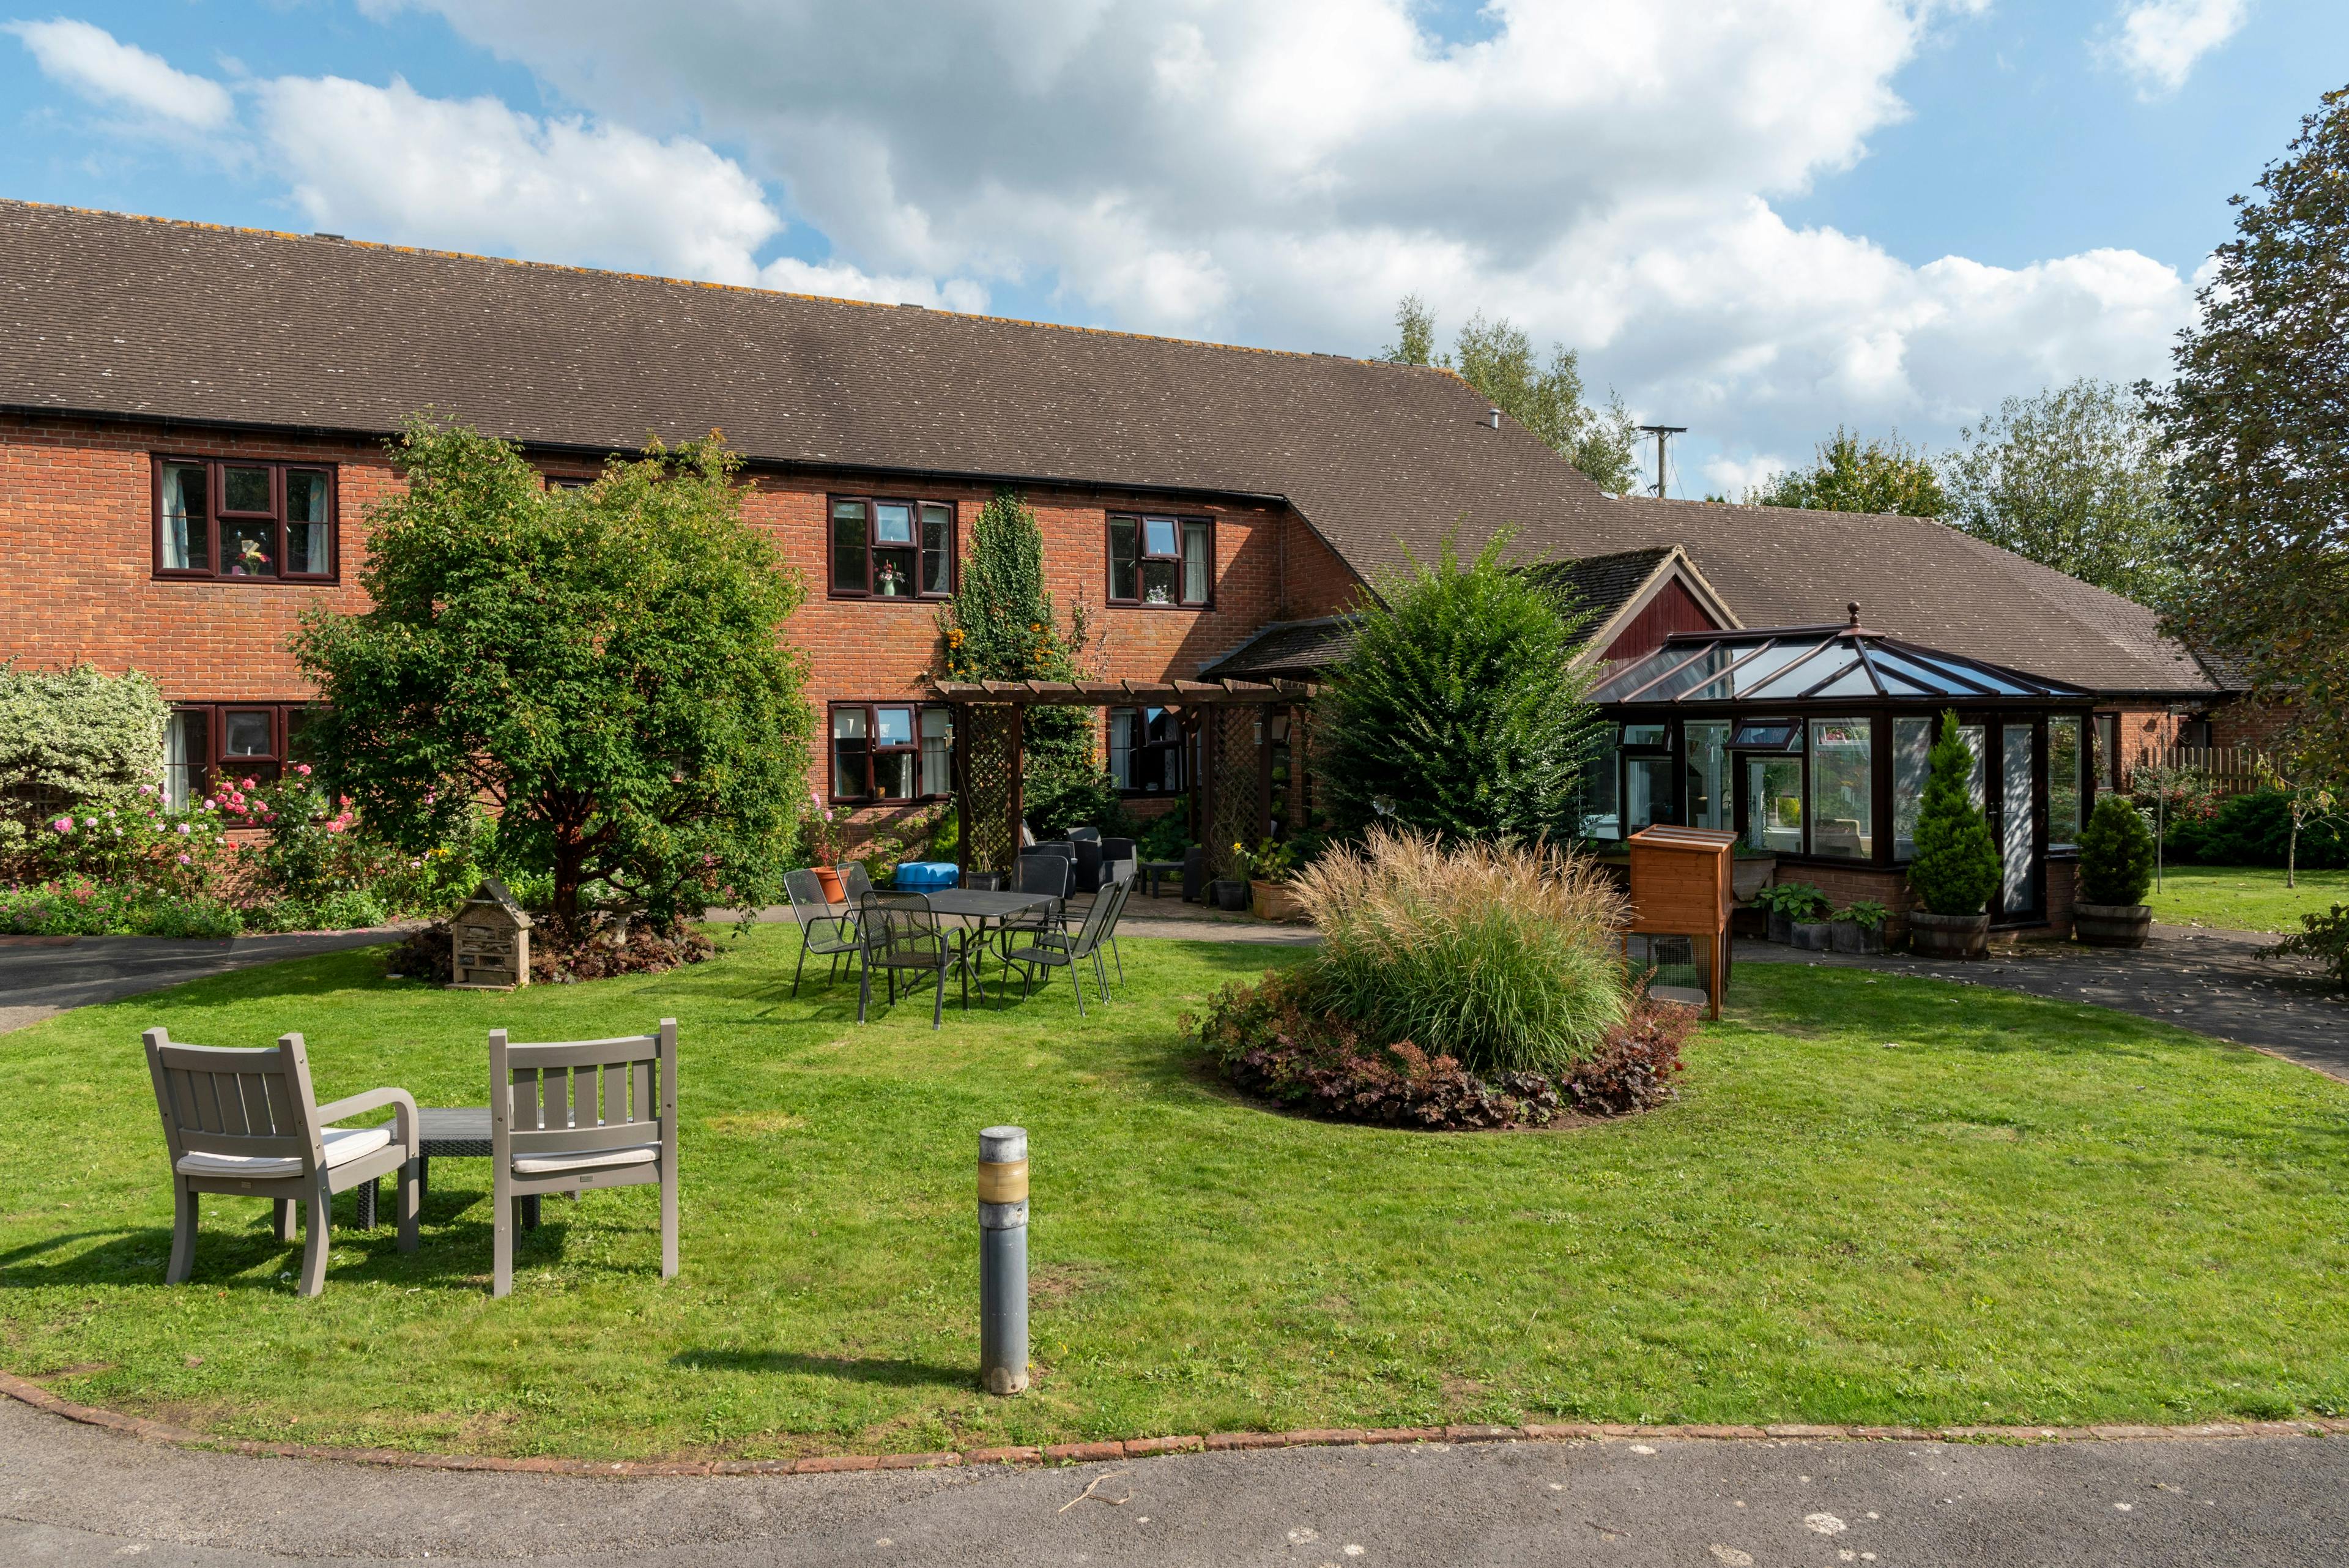 Brendoncare - Brendoncare Froxfield care home 1